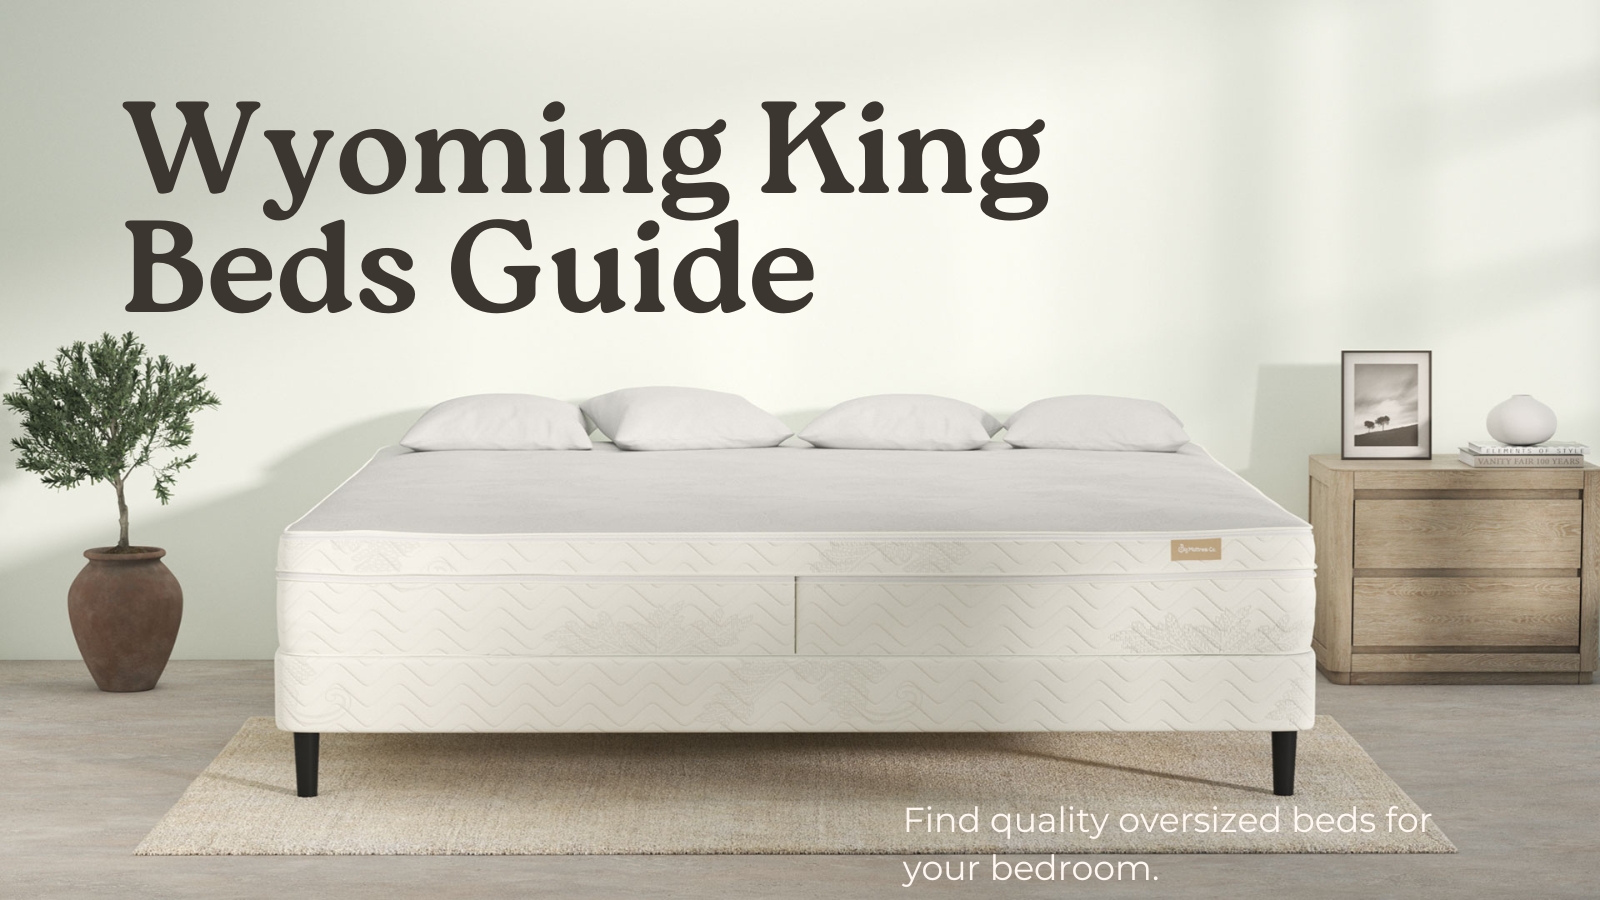 wyoming king beds guide